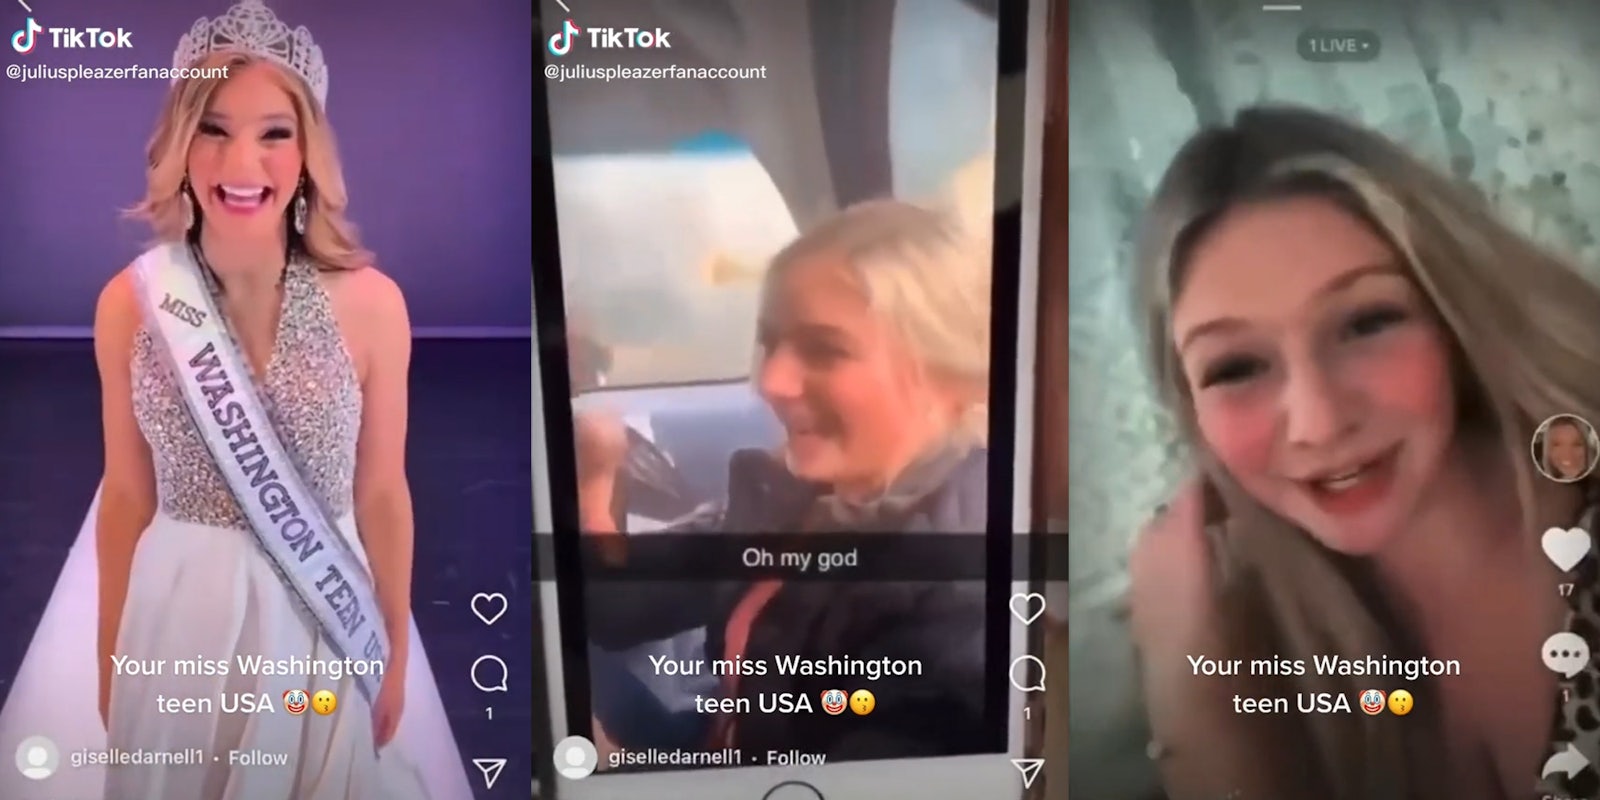 miss washington teen usa in dress and crown (l) same girl in back seat of car (c) same girl laughing (r) all with caption 'Your miss Washington teen USA'